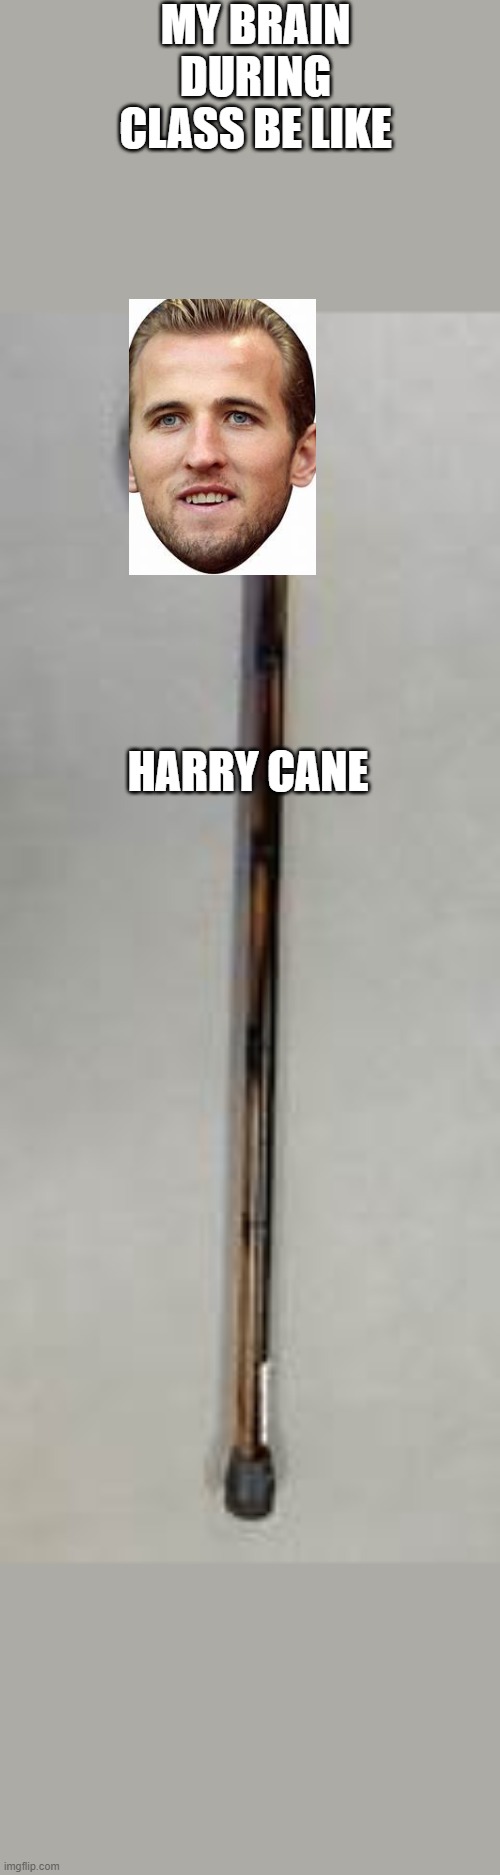 MY BRAIN DURING CLASS BE LIKE; HARRY CANE | image tagged in sport memes | made w/ Imgflip meme maker